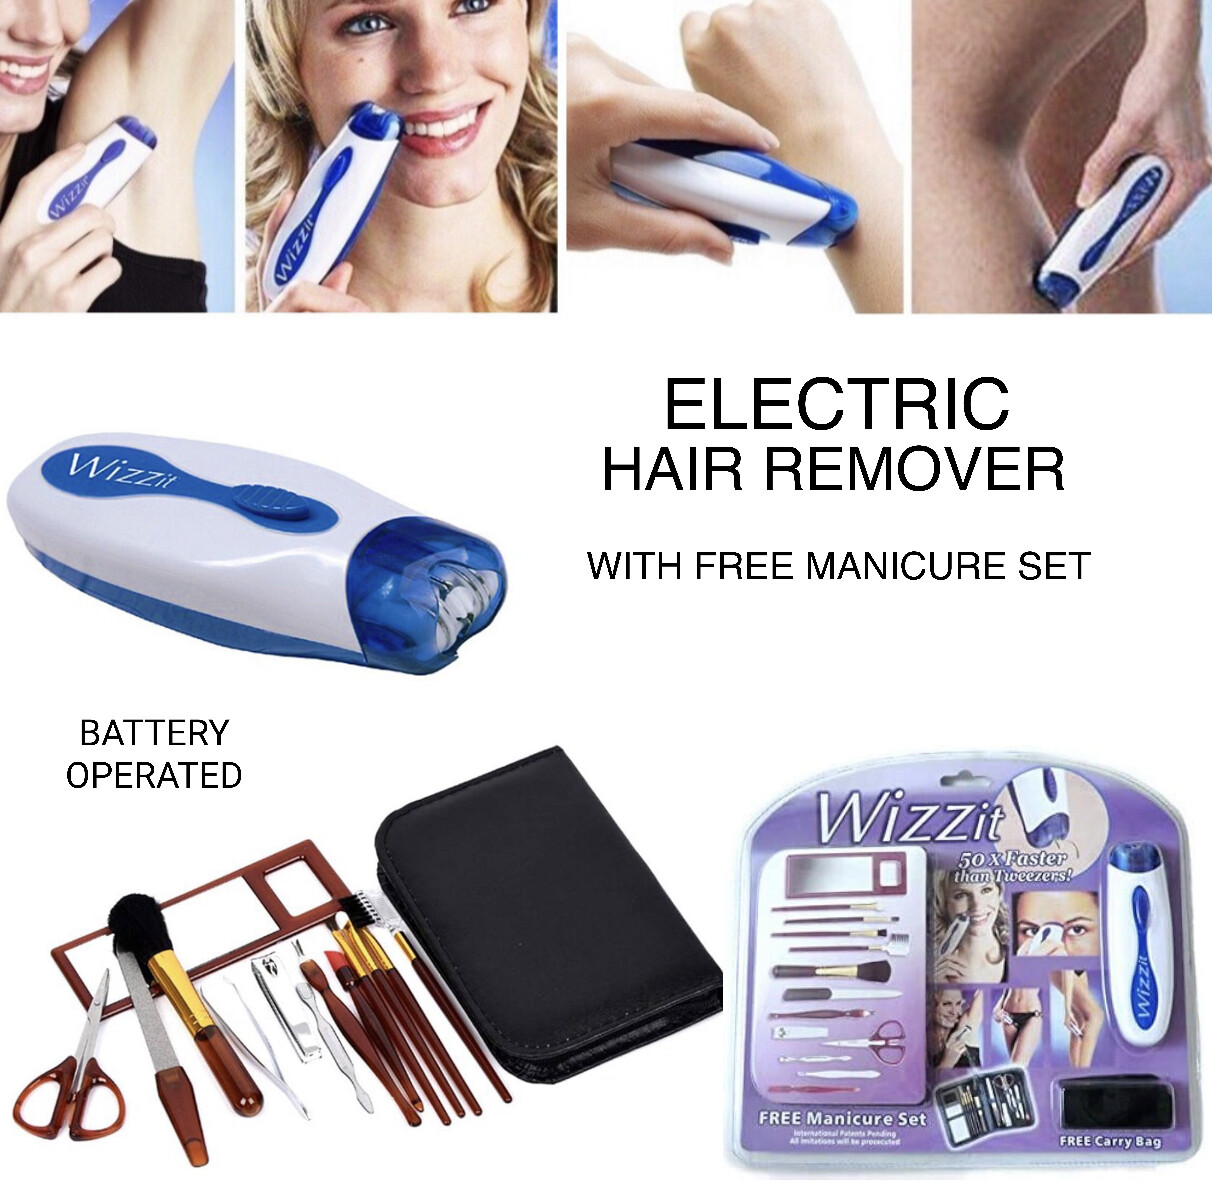 WIZZIT Hair Remover